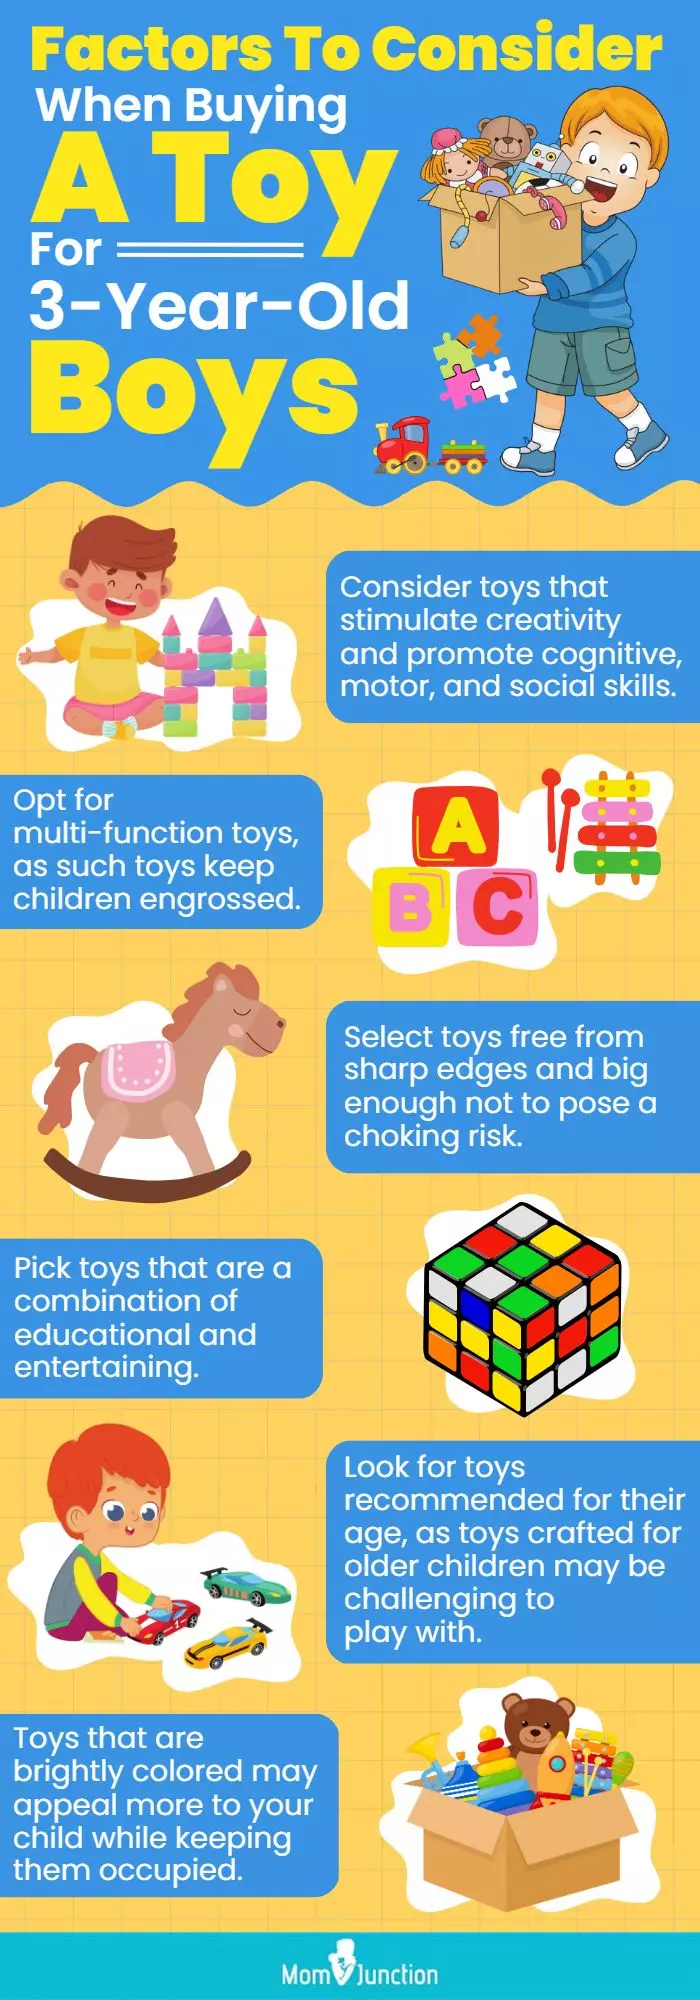 Factors To Consider When Buying A Toy For 3-Year-Old Boys